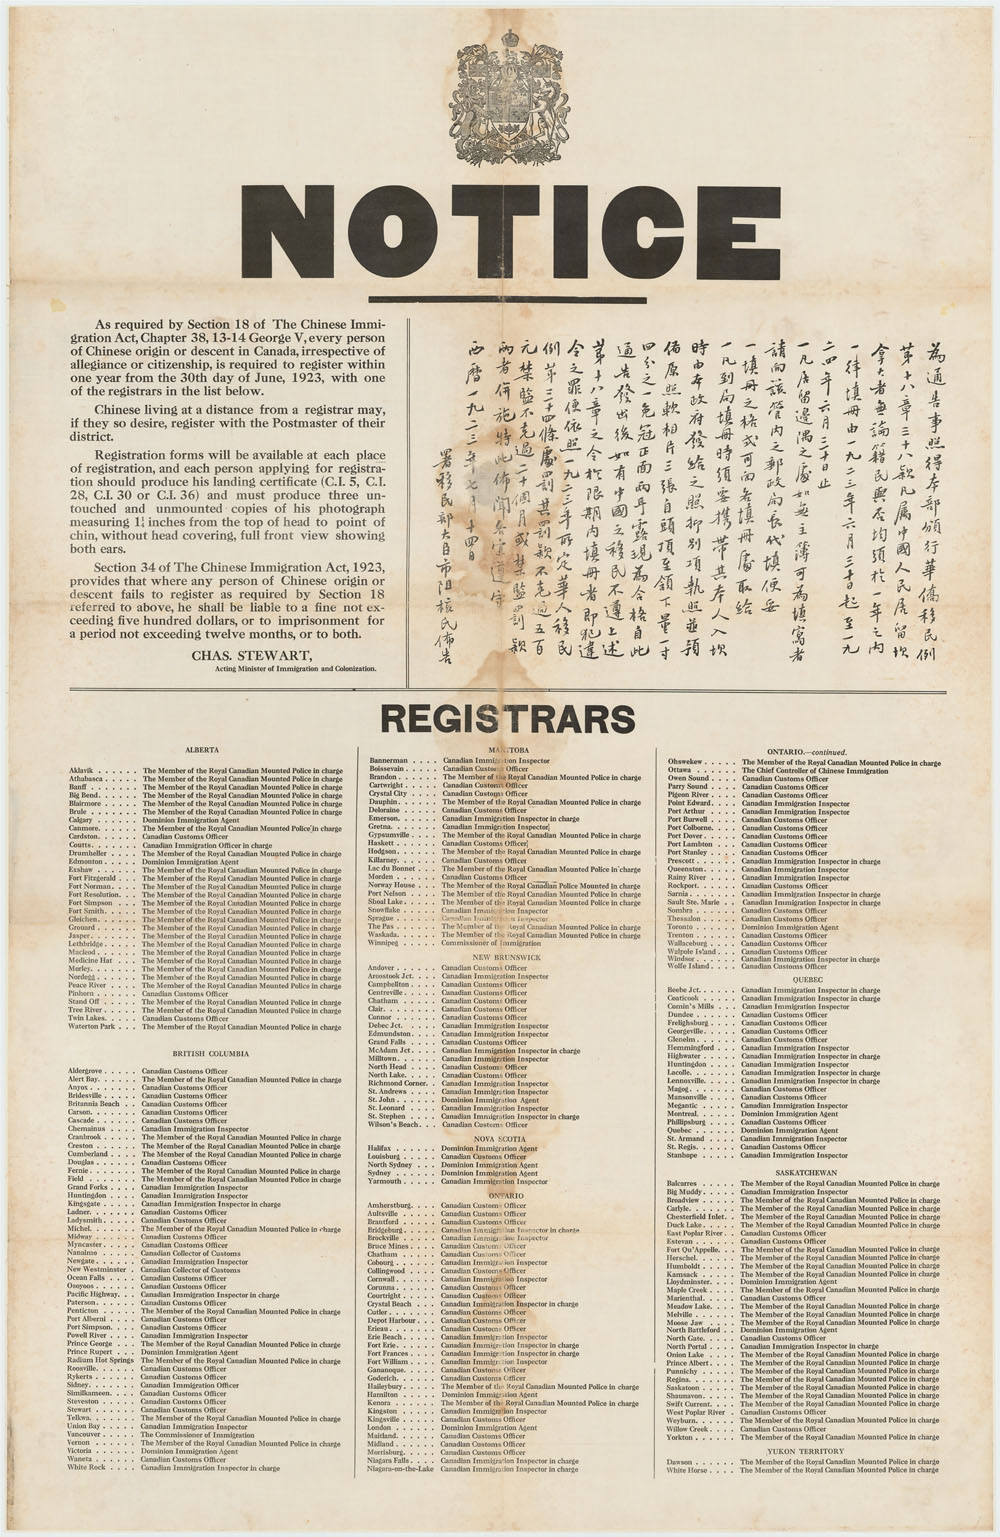 A digitized copy of a poster on Chinese immigration giving public notice of section 18 of the Chinese Exclusion Act and its registration requirement.